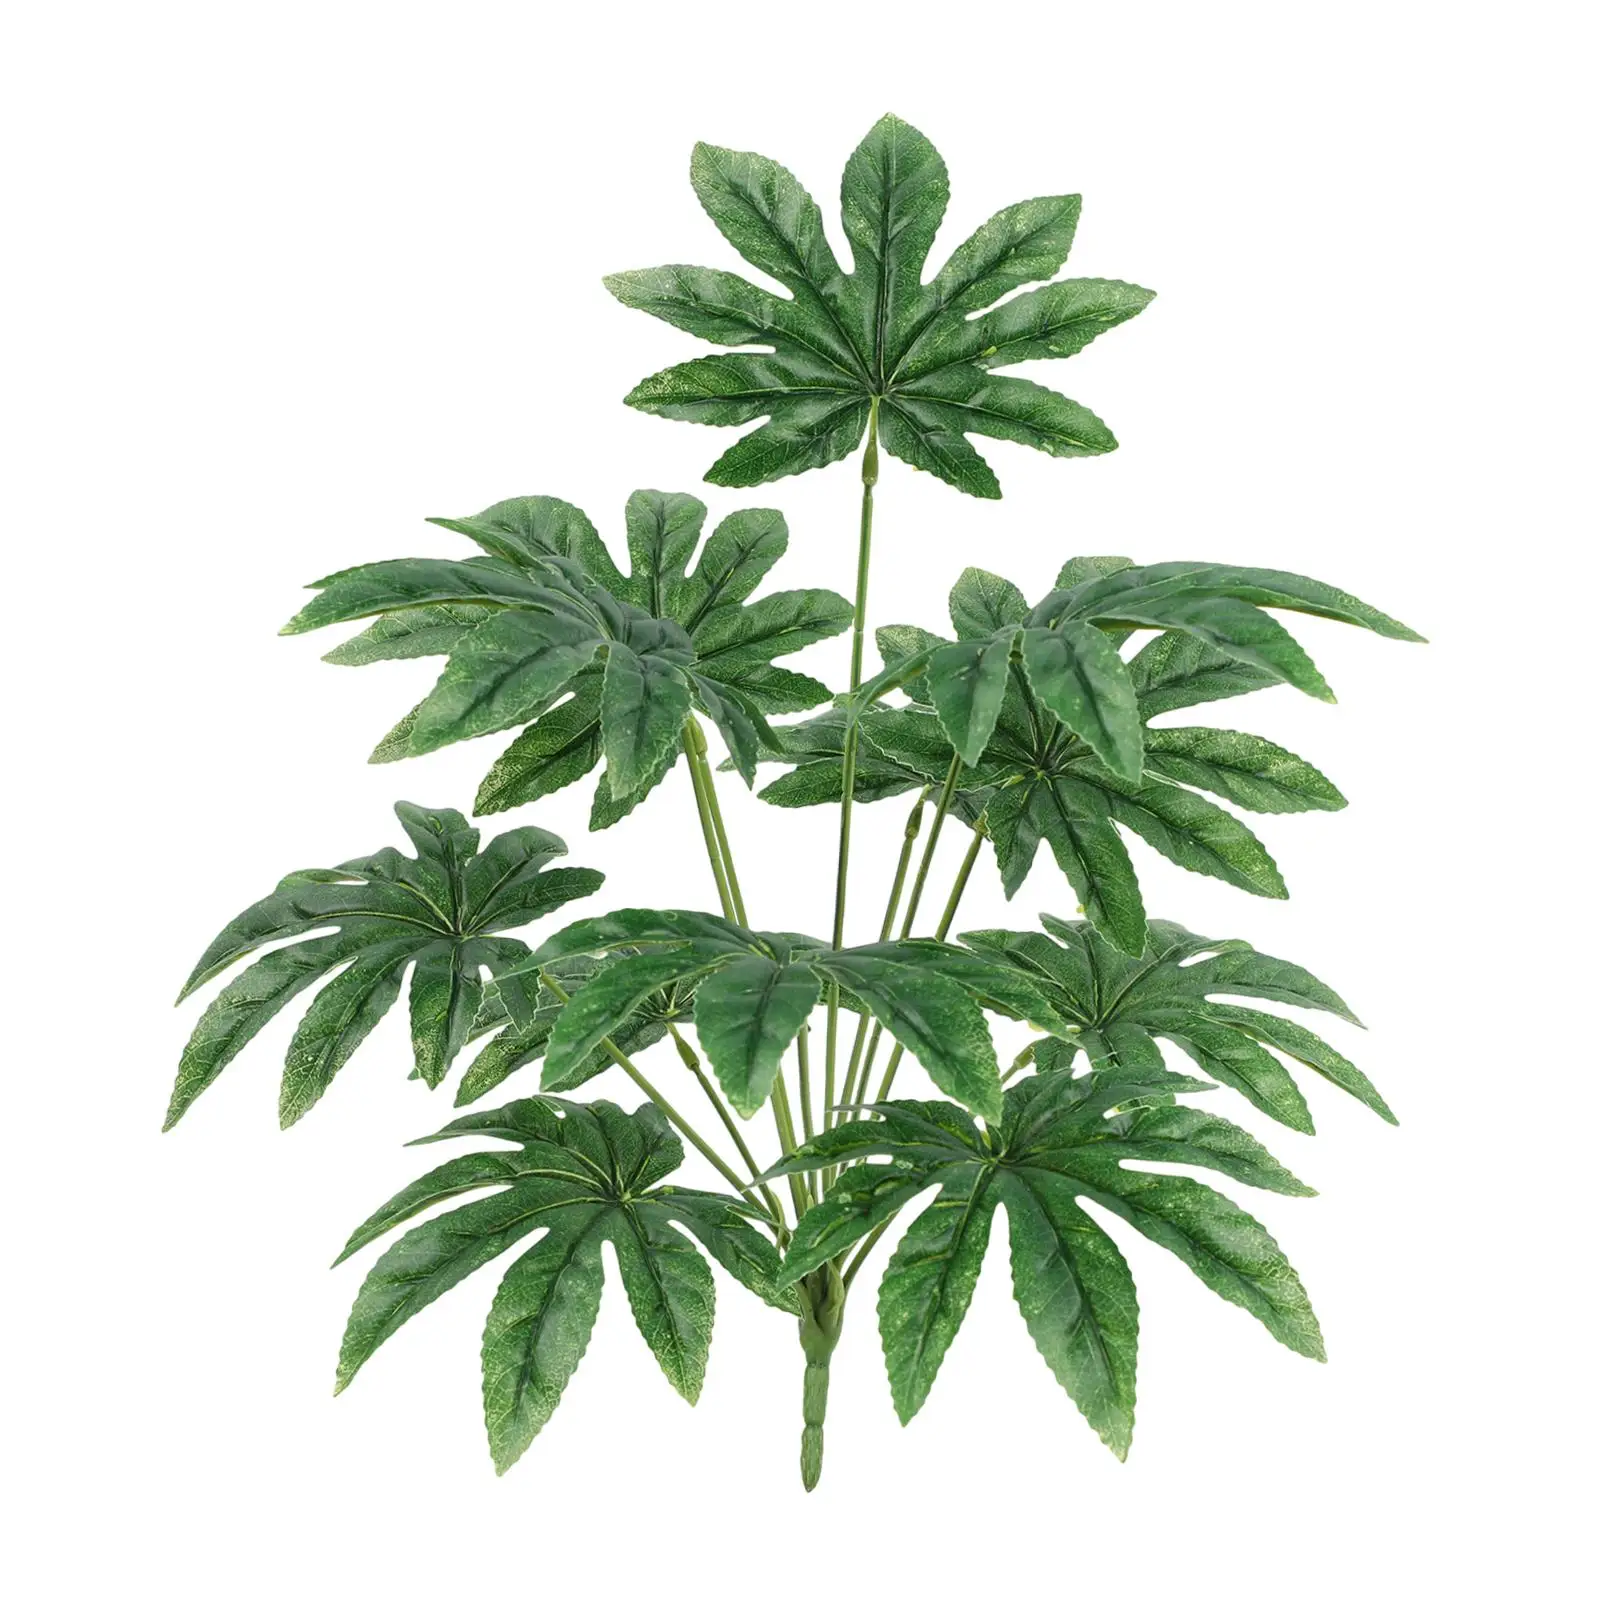 Faux Plants Realistic Photo Props Green Garden Decoration Home Decor Greenery Decoration for Home Office Kitchen Bathroom Shelf